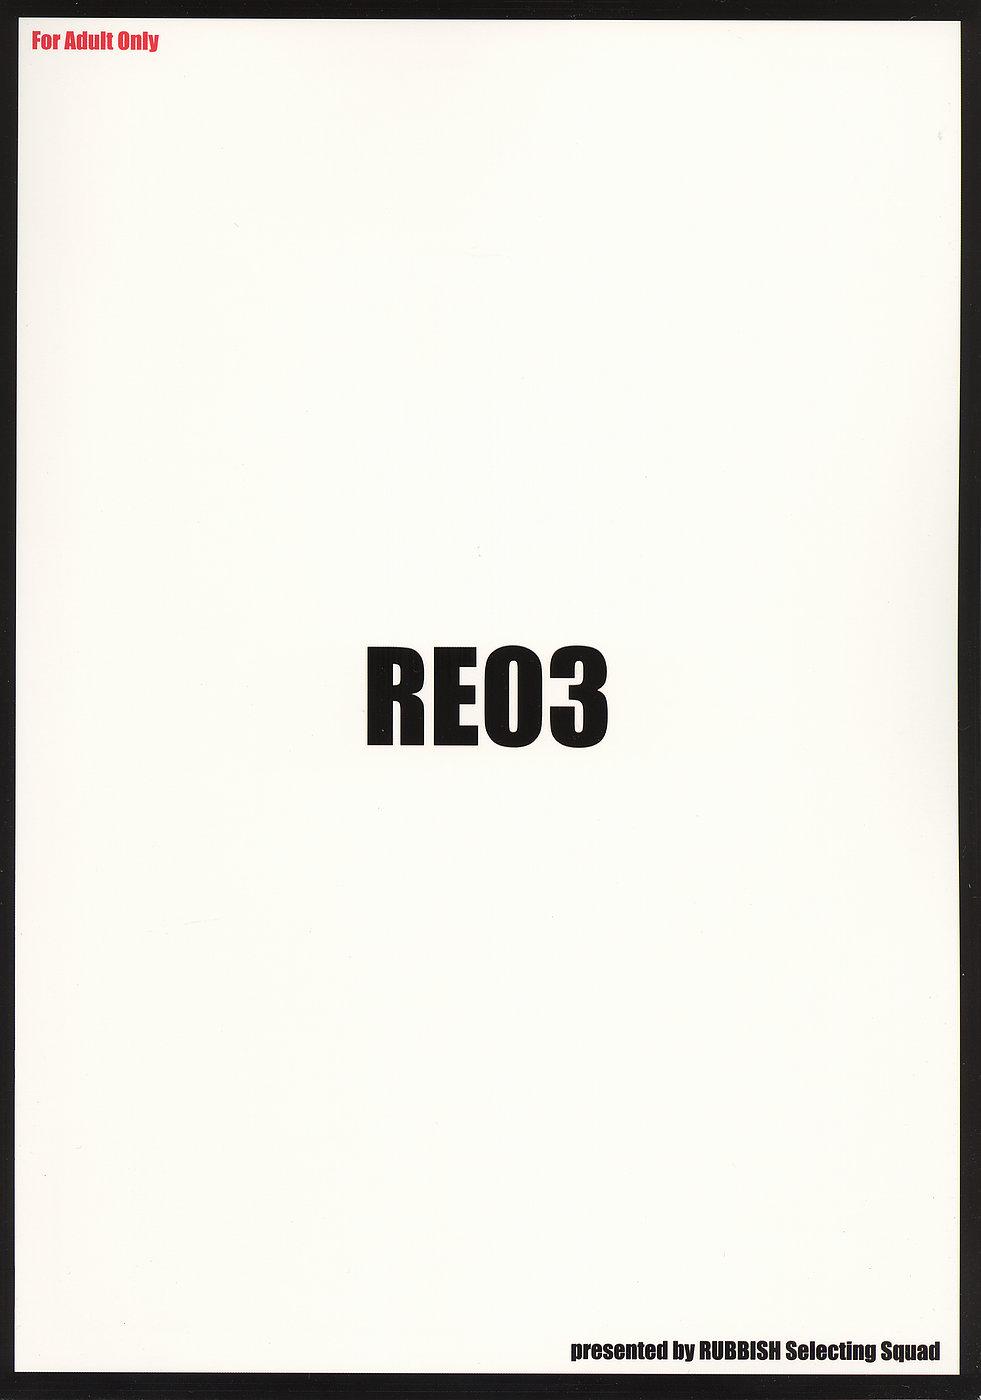 RE 03 40